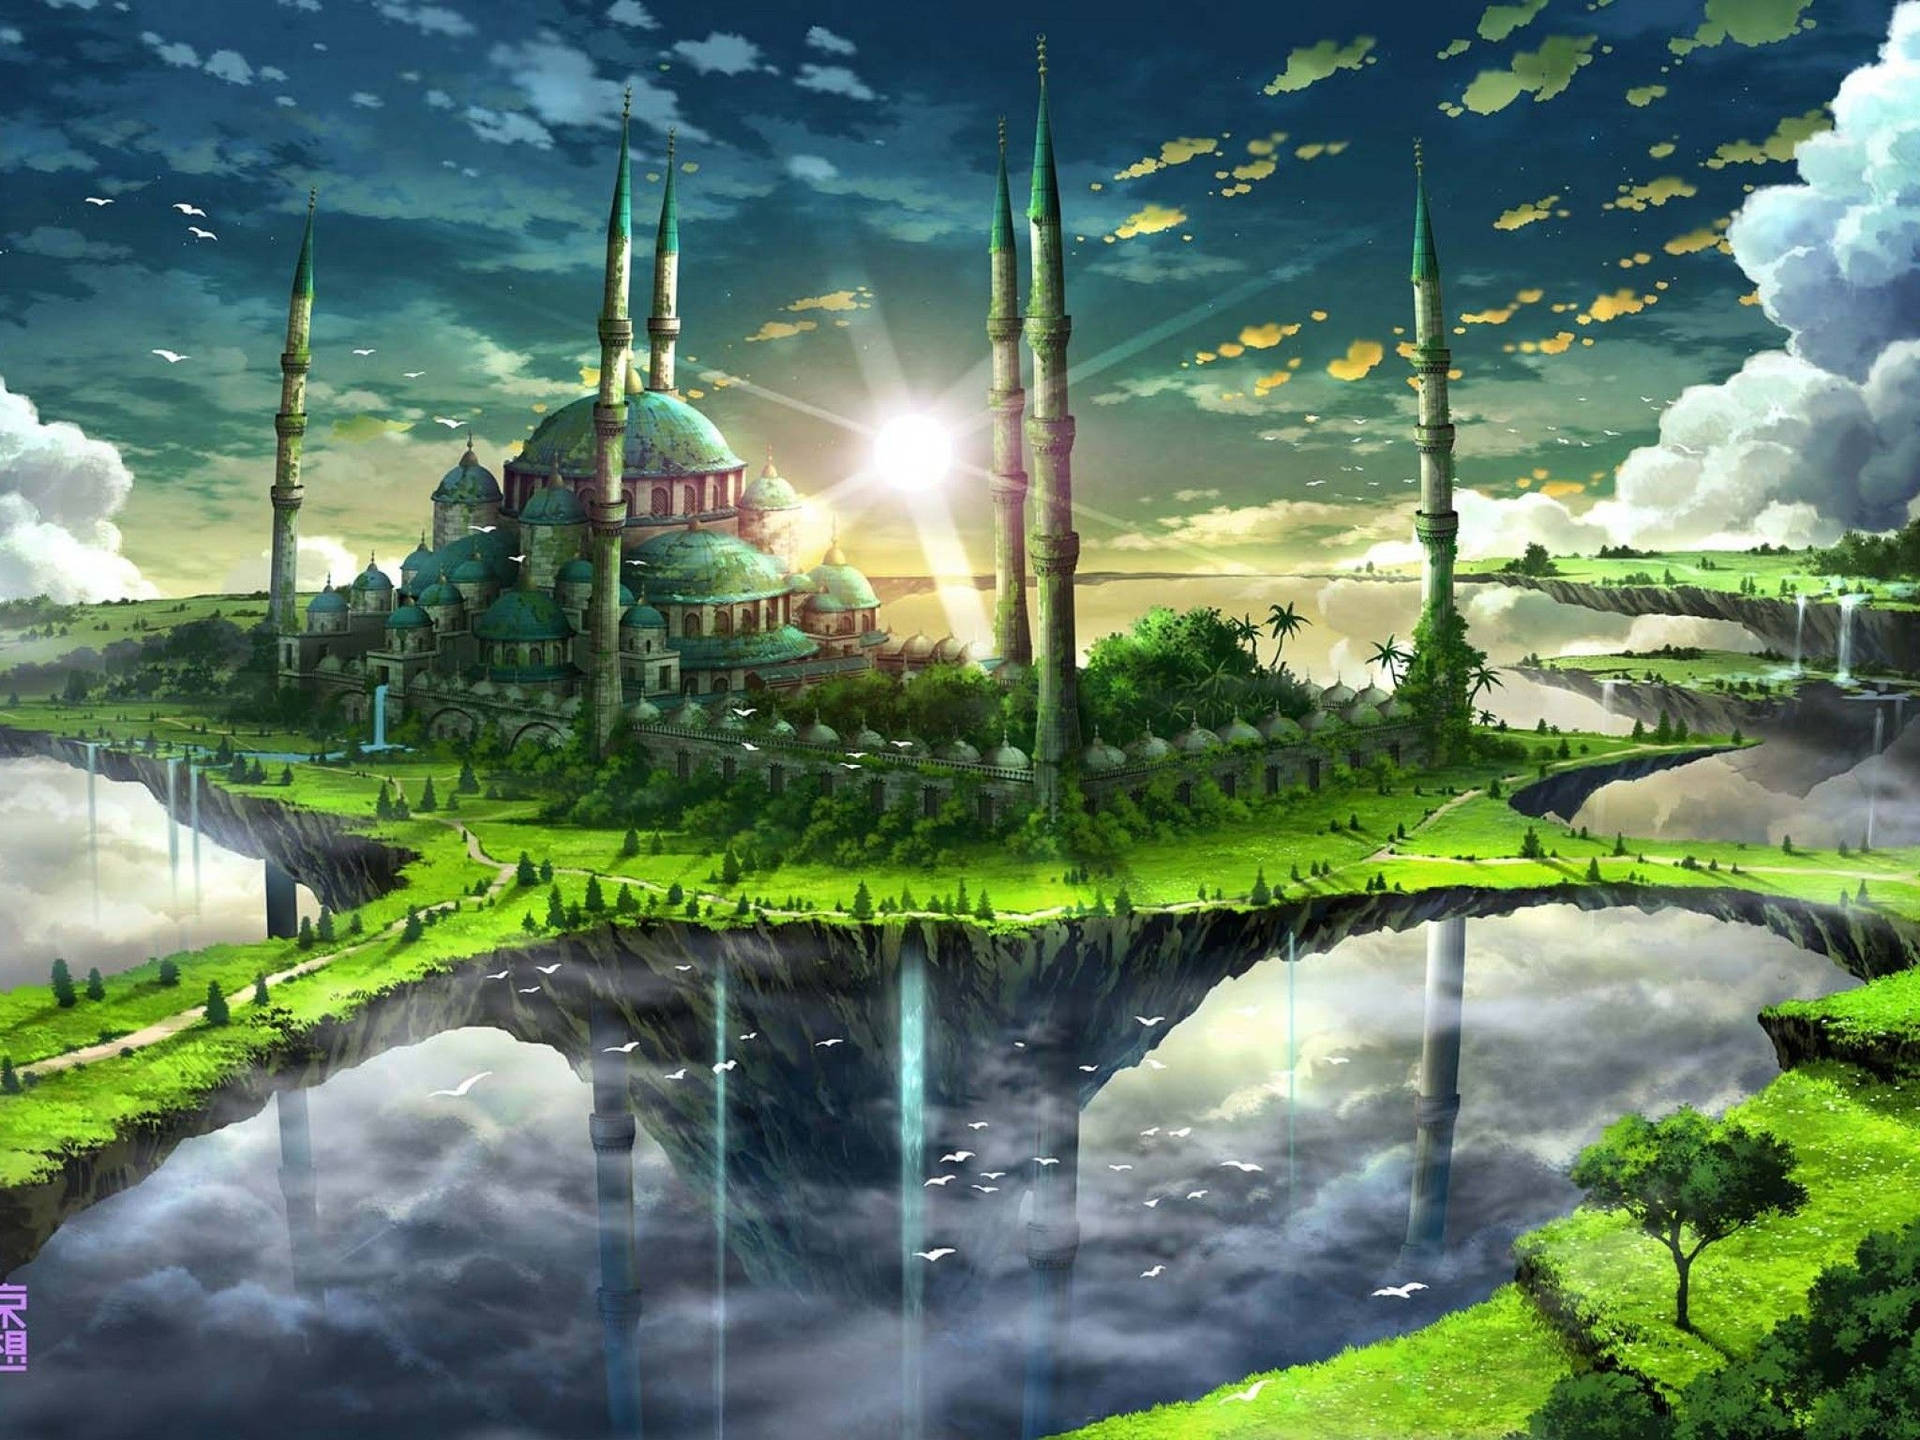 Magnificent Green Temple On A Floating Island In The Sky Background